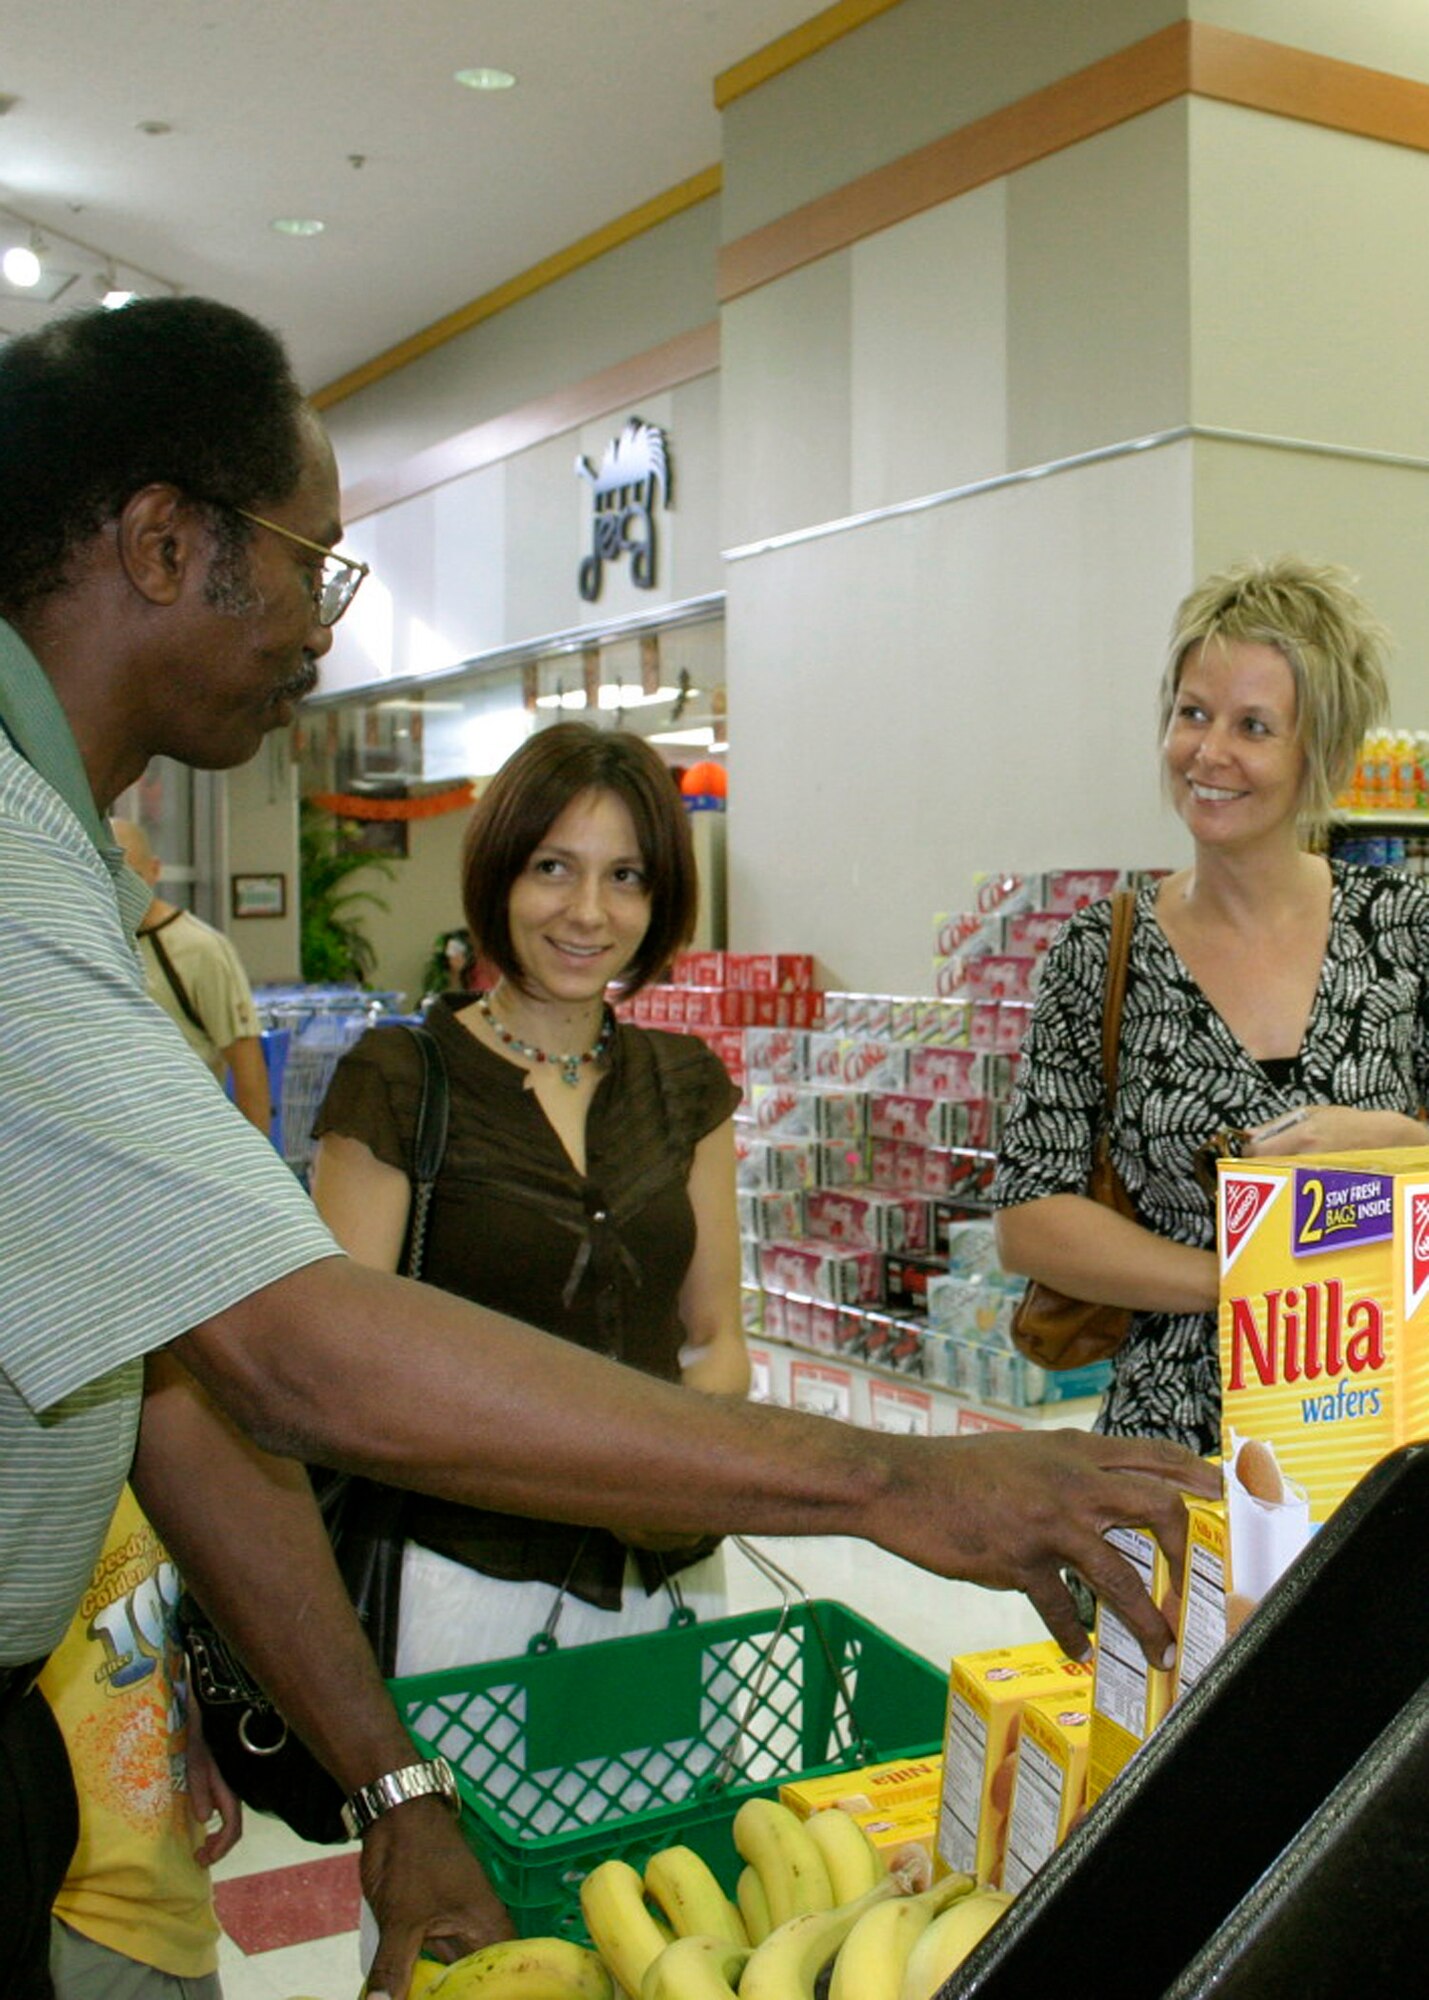 MISAWA AIR BASE, Japan -- Greg McGruder, commissary manager, speaks with customers Katie Cudzilo and Britta Strop about the produce displayed Sept. 4, 2008. Inputs from customers help Mr. McGruder and his team provide quality produce at lower prices. (U.S. Air Force photo by Staff Sgt. Araceli Alarcon)